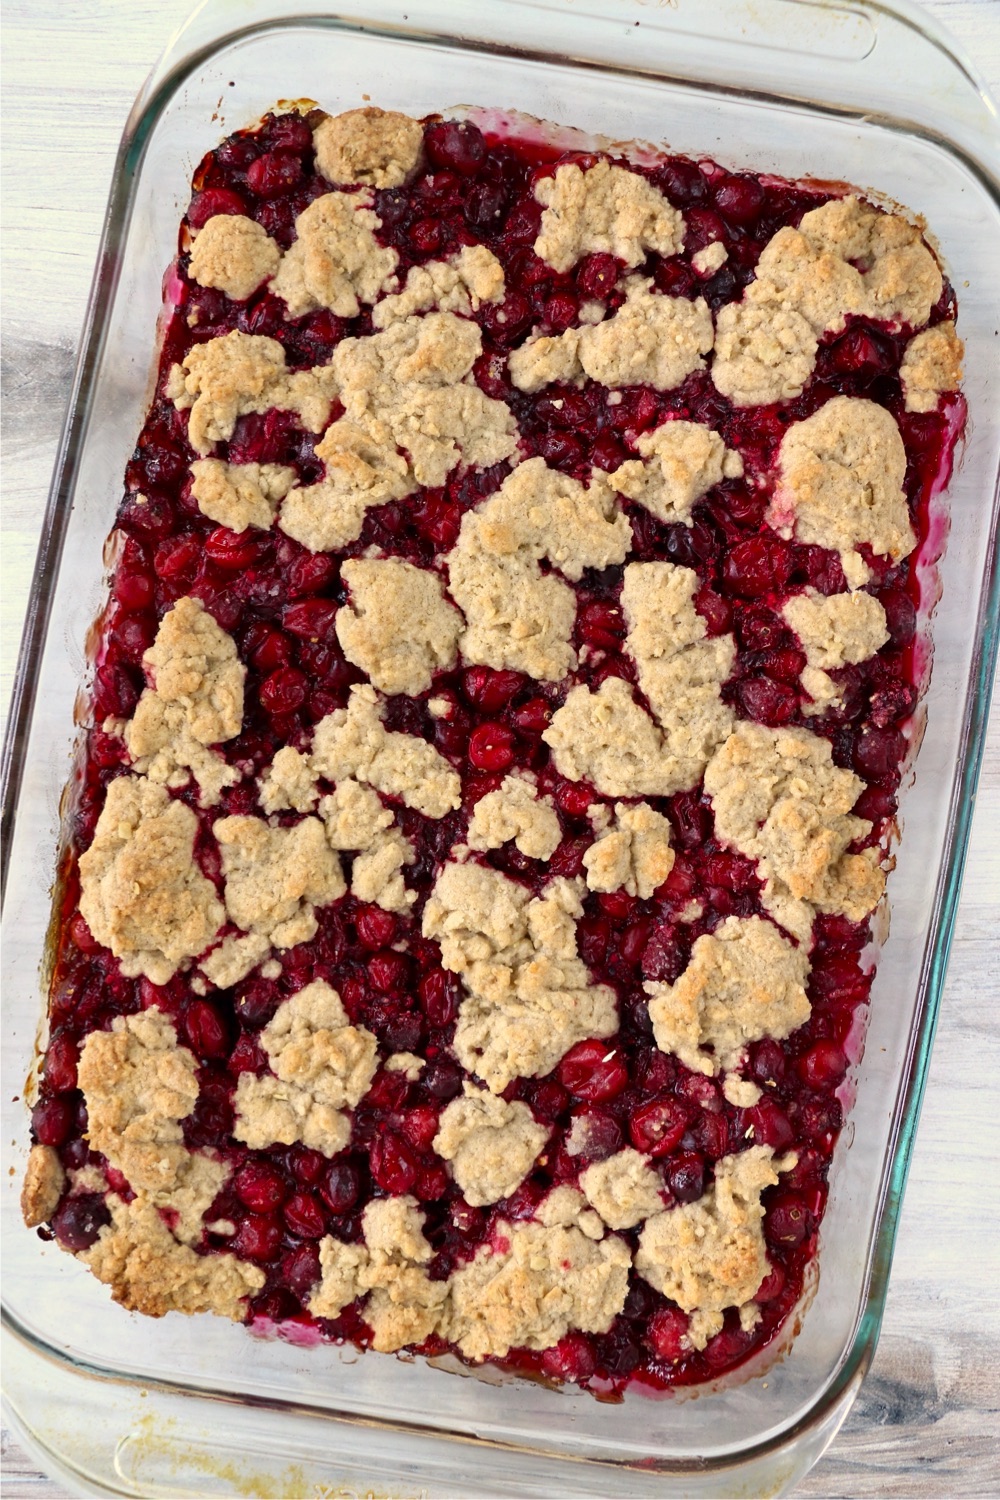 Cranberry bars topped with oatmeal crumble